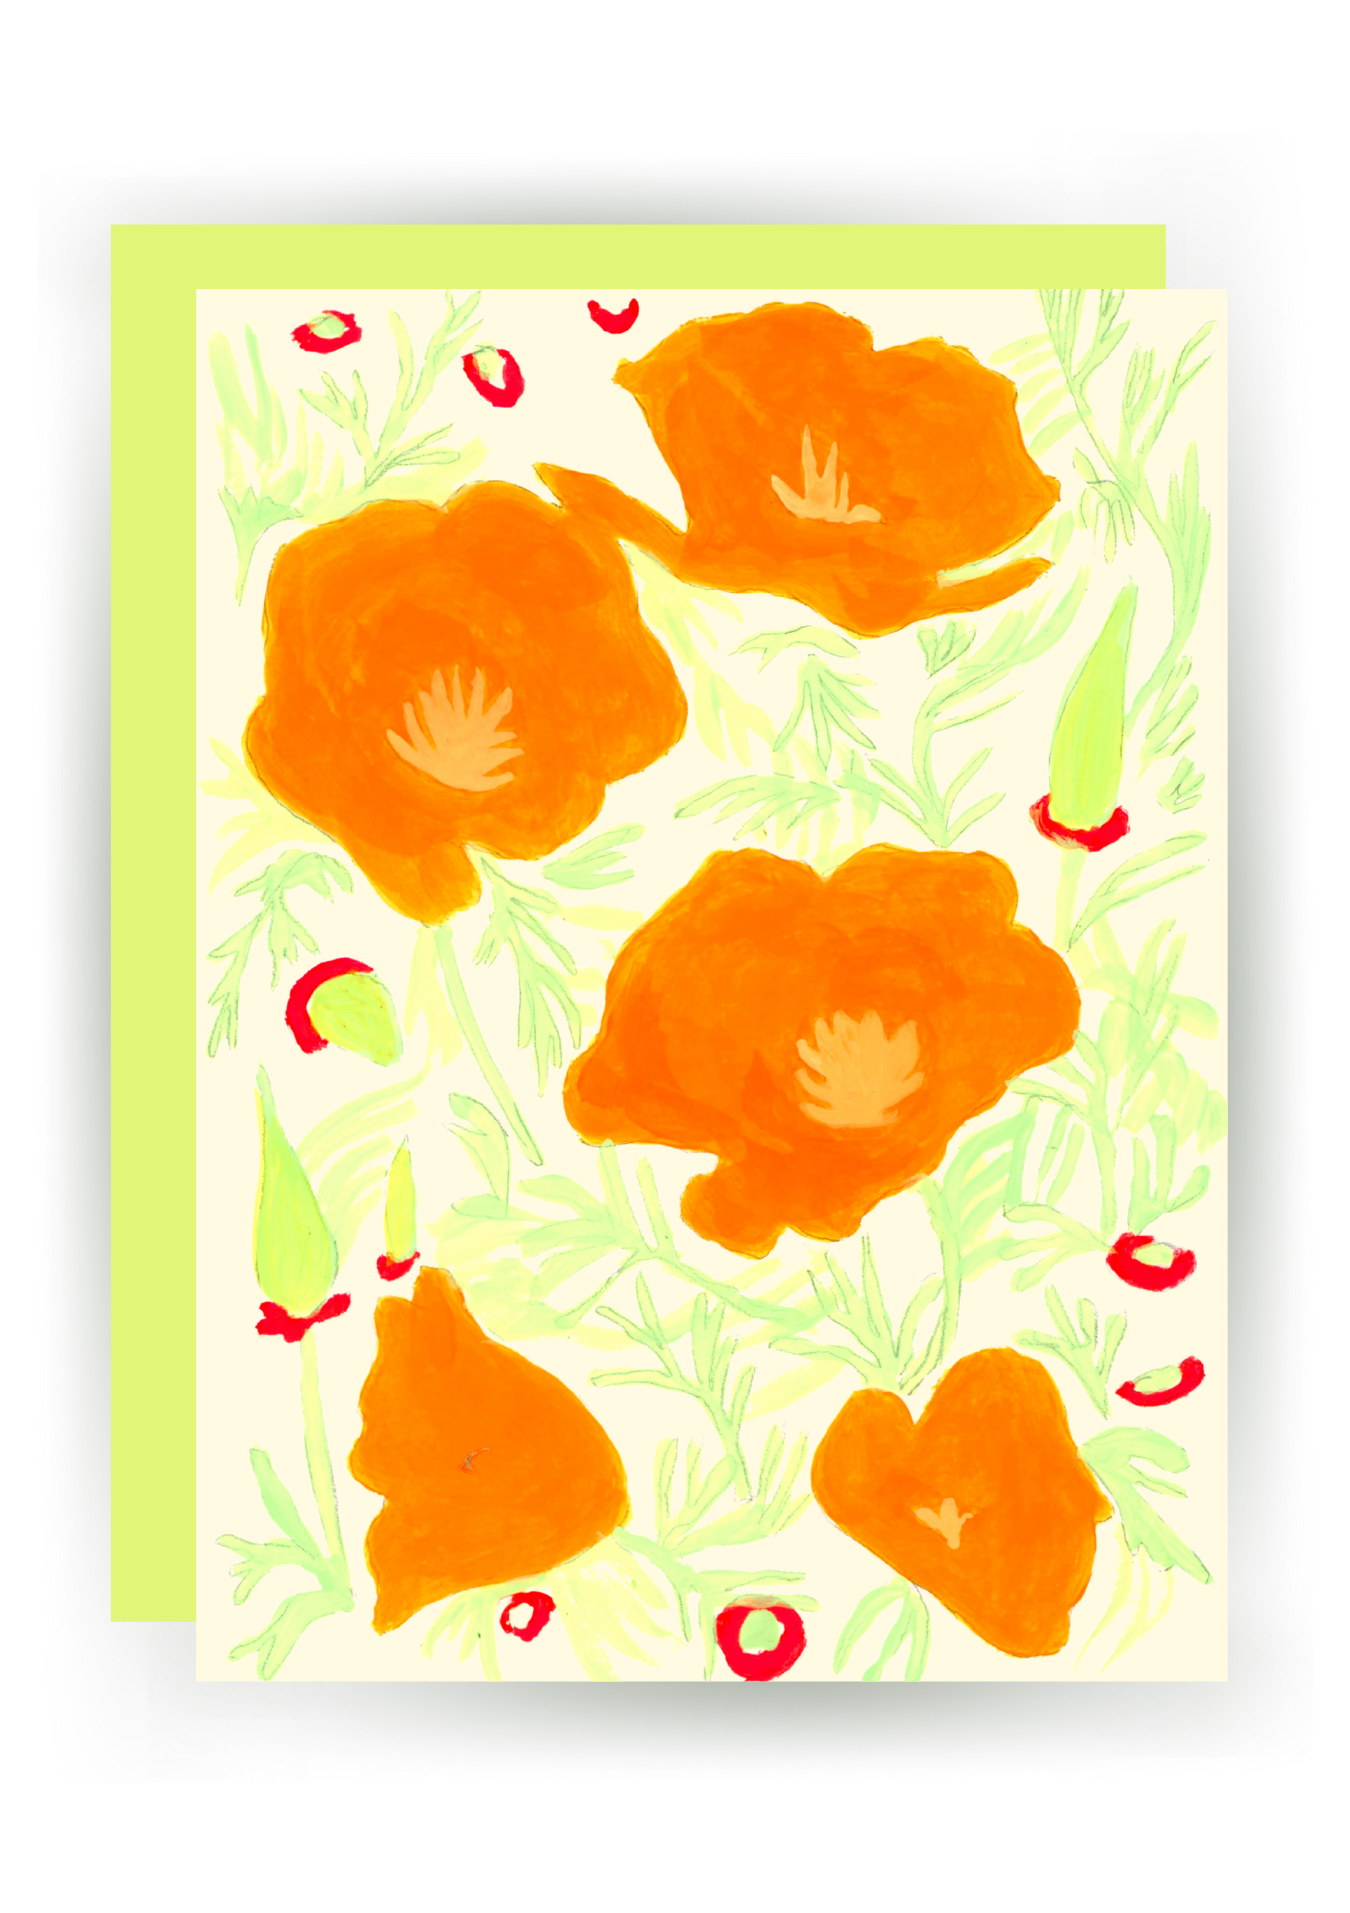 NF GC 037 / Superbloom-Cali Poppies Greeting Card